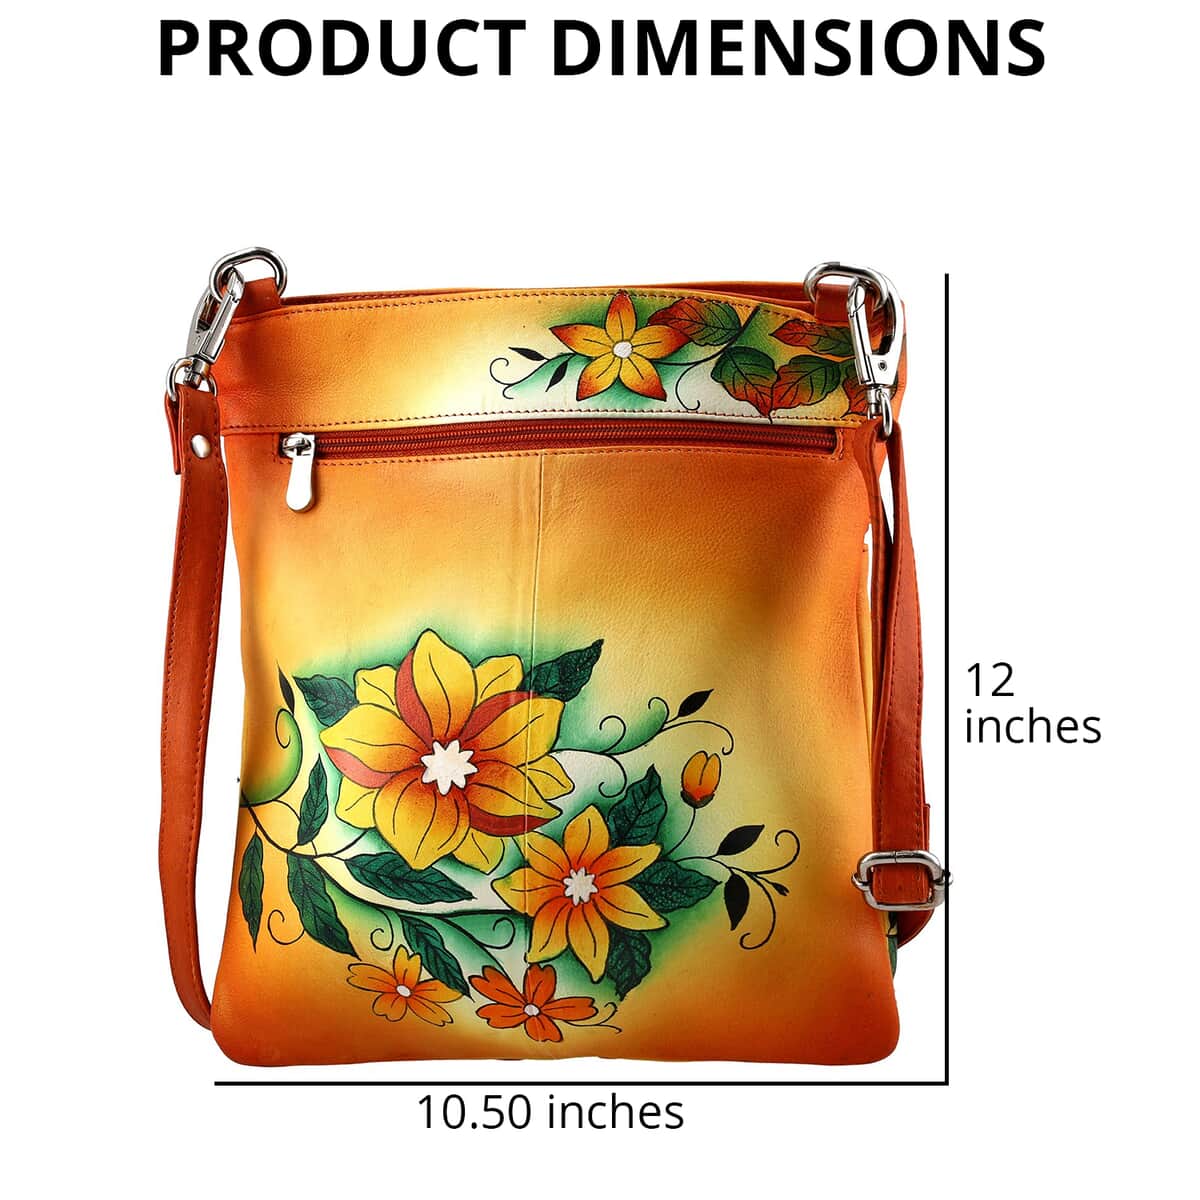 "SUKRITI Super Organized Floral Butterfly Hand Painted Genuine Leather Crossbody Bag Size: 10.5(L)x12(W) inches Color: Orange" image number 4